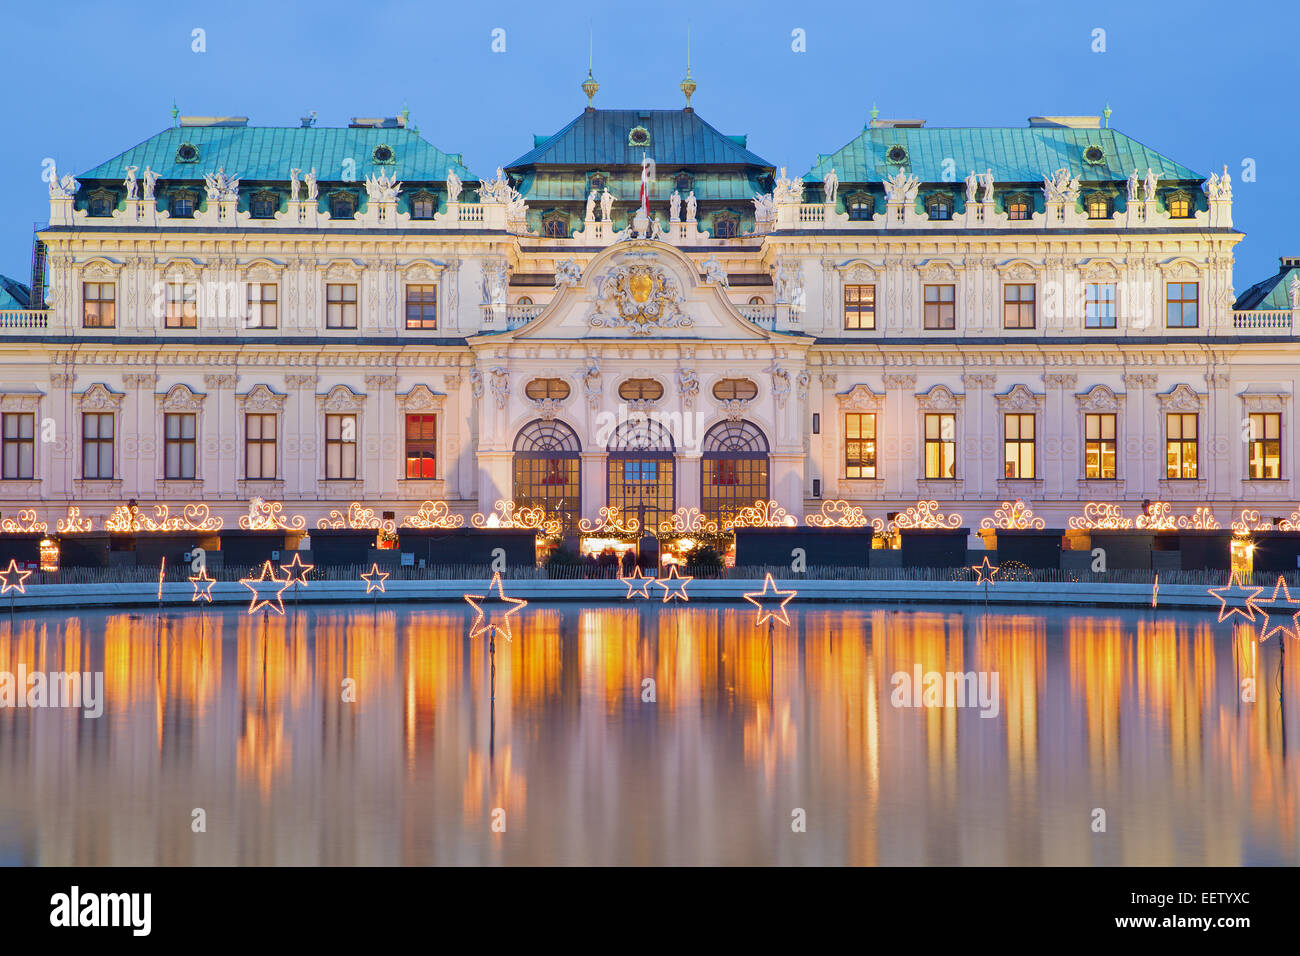 Vienna - Belvedere palace at the christmas market in dusk Stock Photo